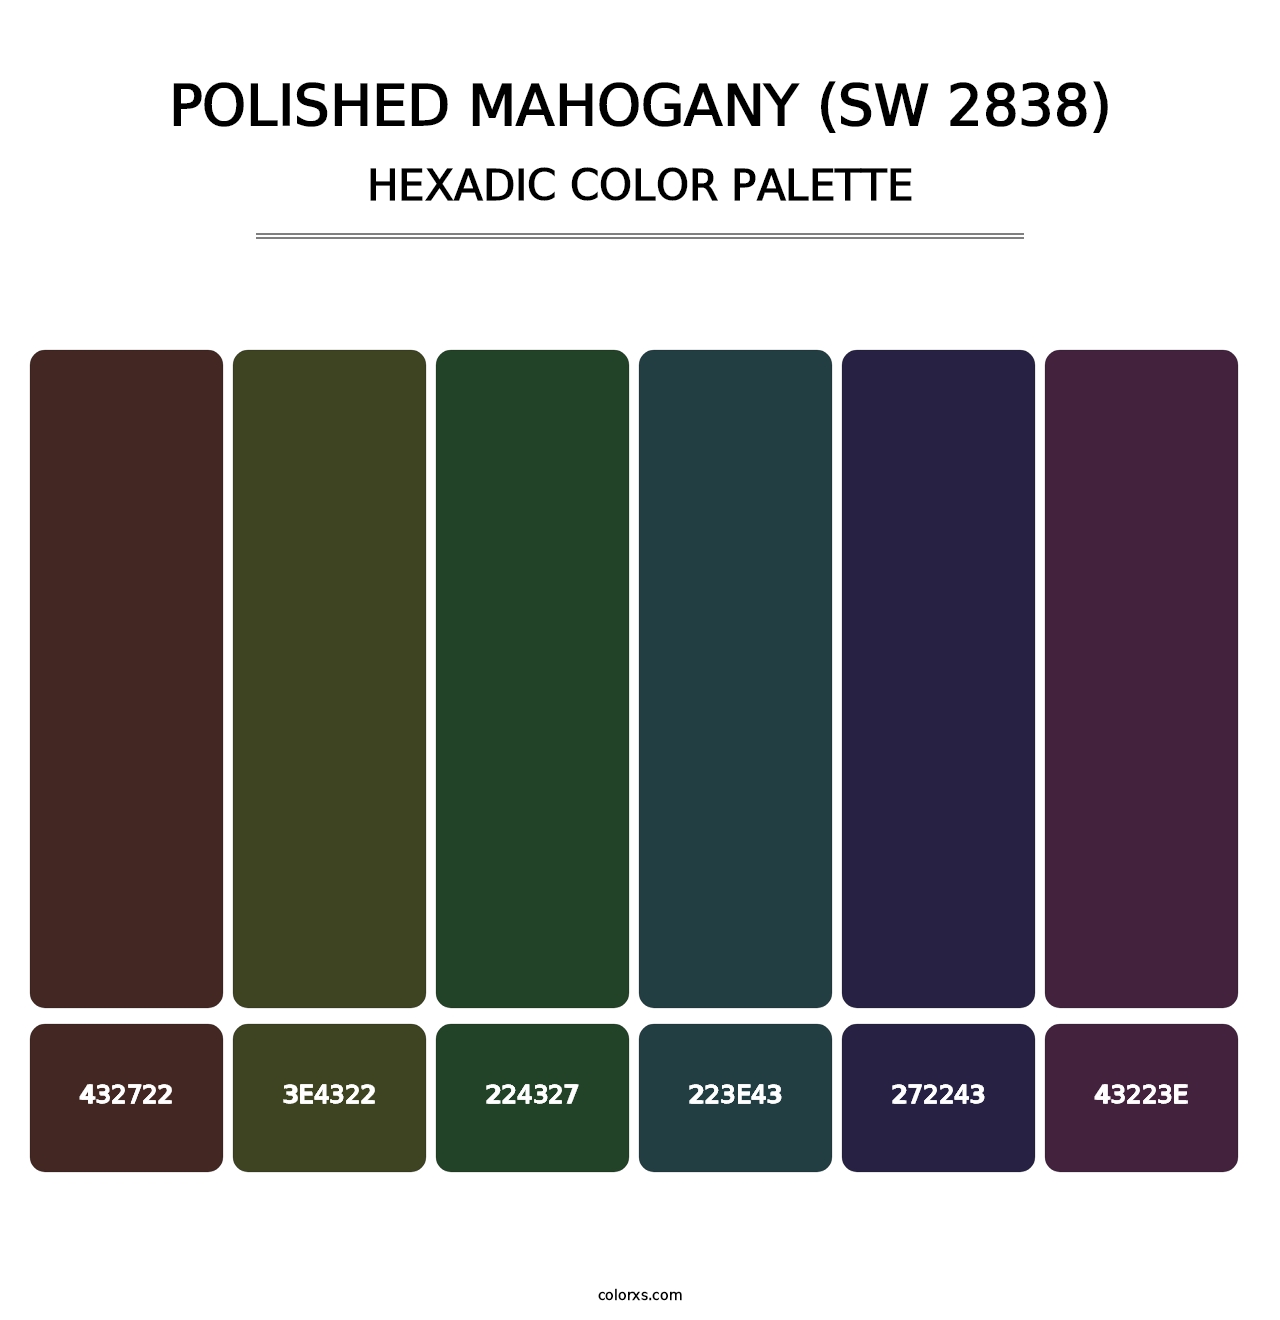 Polished Mahogany (SW 2838) - Hexadic Color Palette